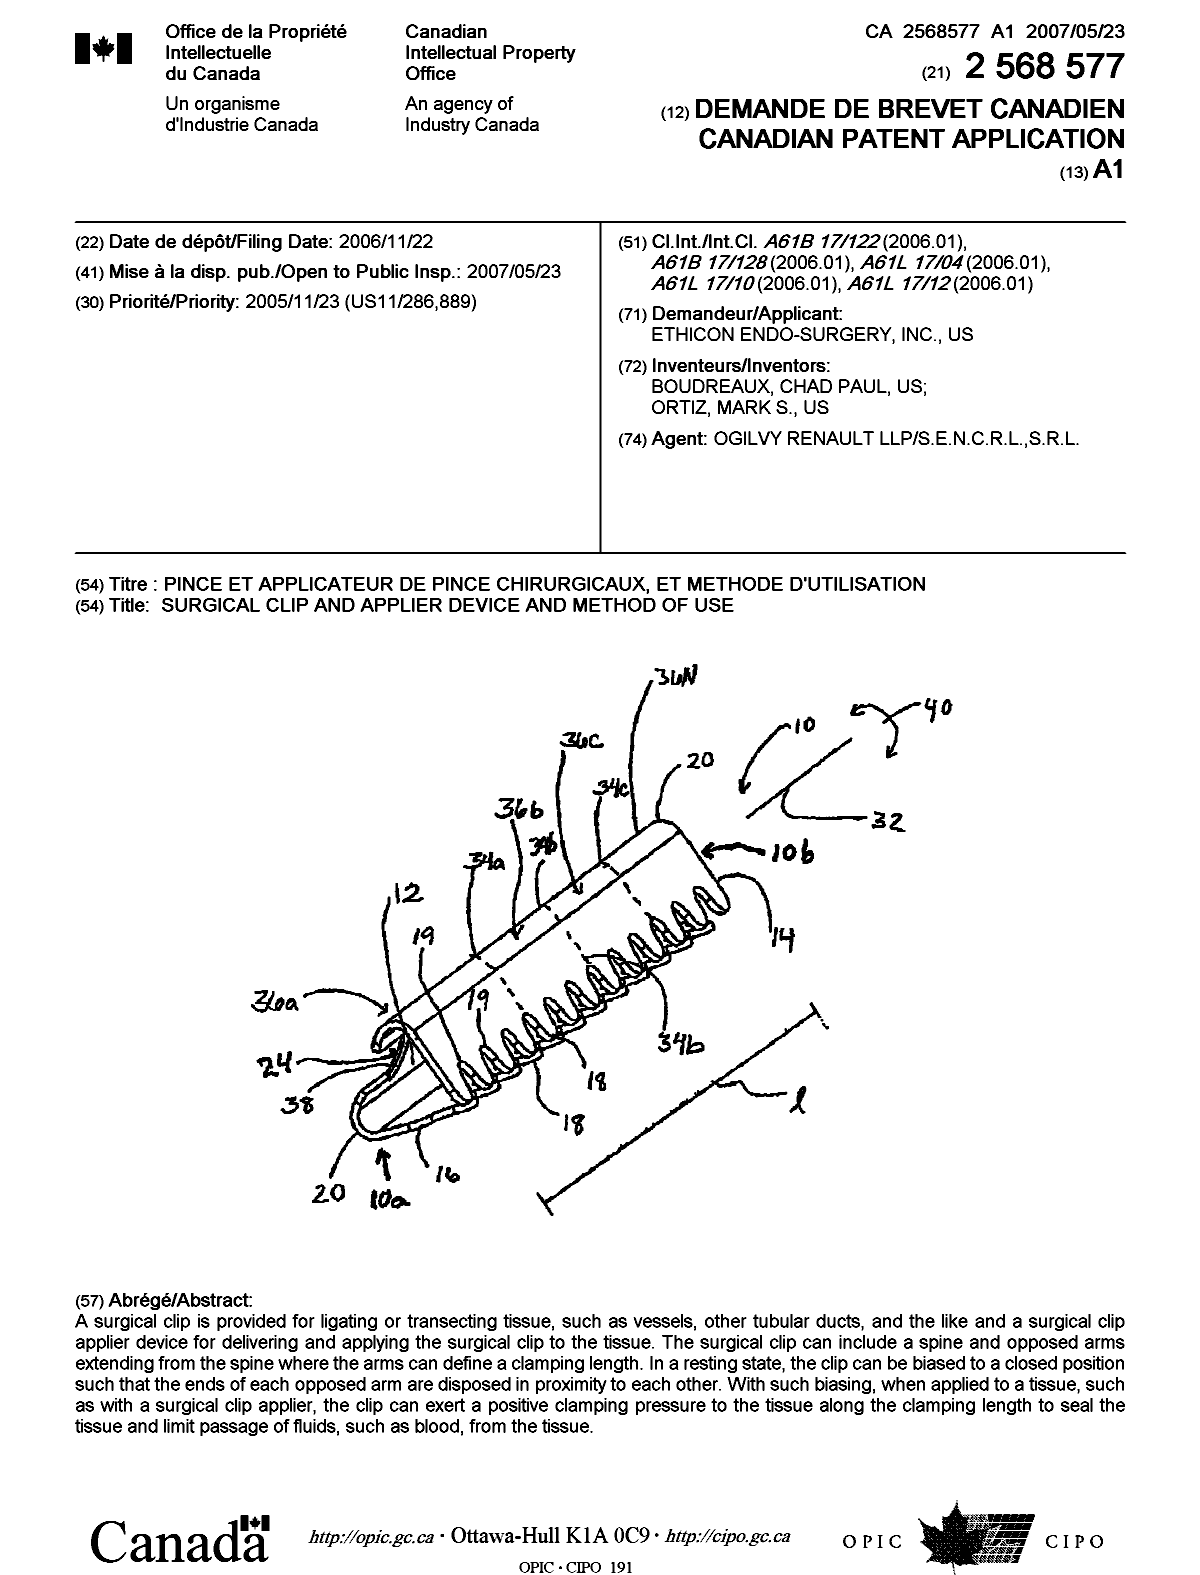 Canadian Patent Document 2568577. Cover Page 20070515. Image 1 of 1